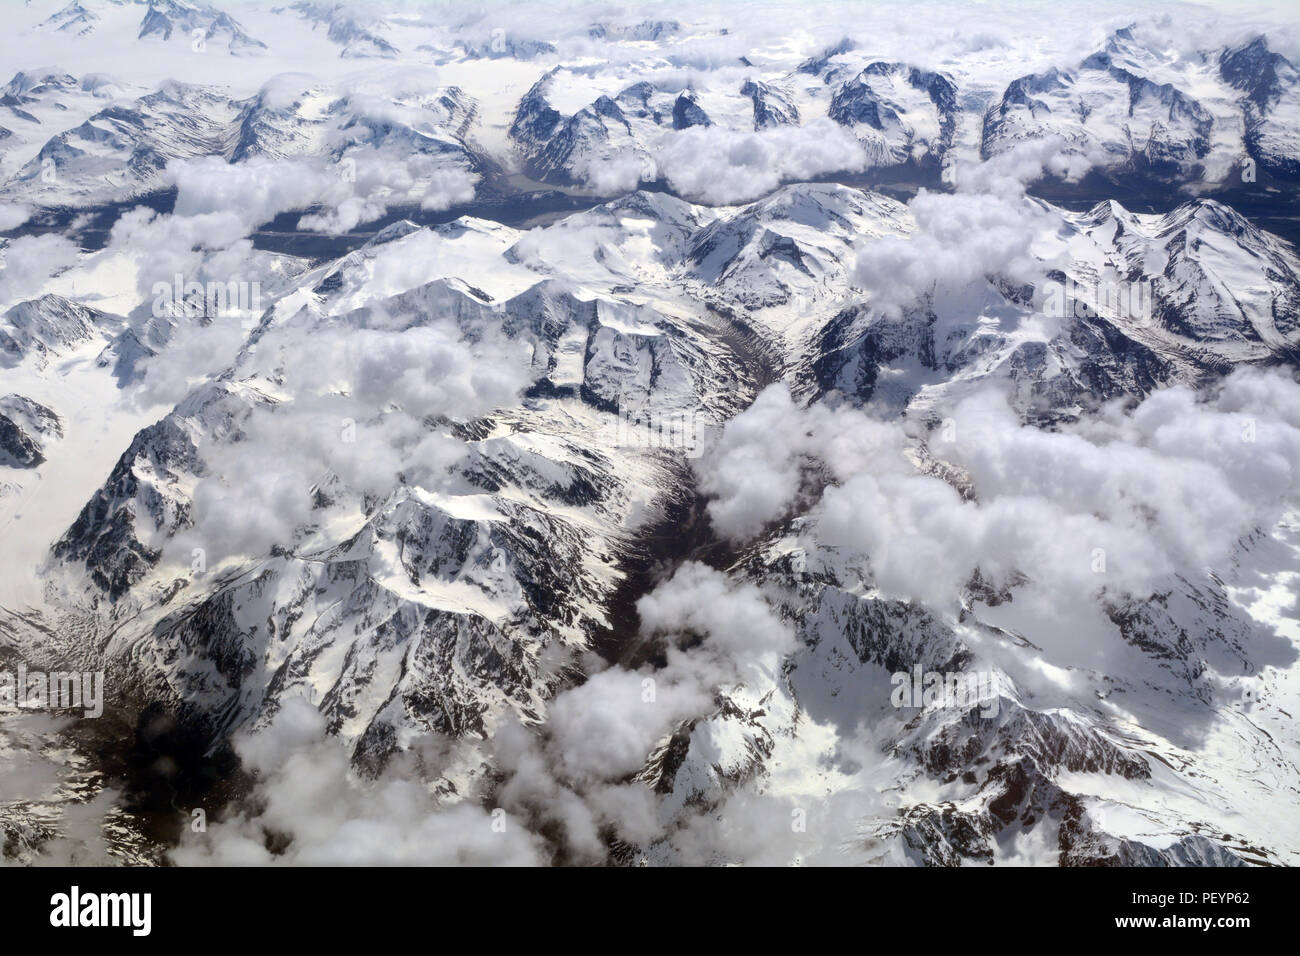 An aerial view of glaciated mountains and icefields in Wrangell St. Elias National Park and Preserve, Alaska, United States. Stock Photo